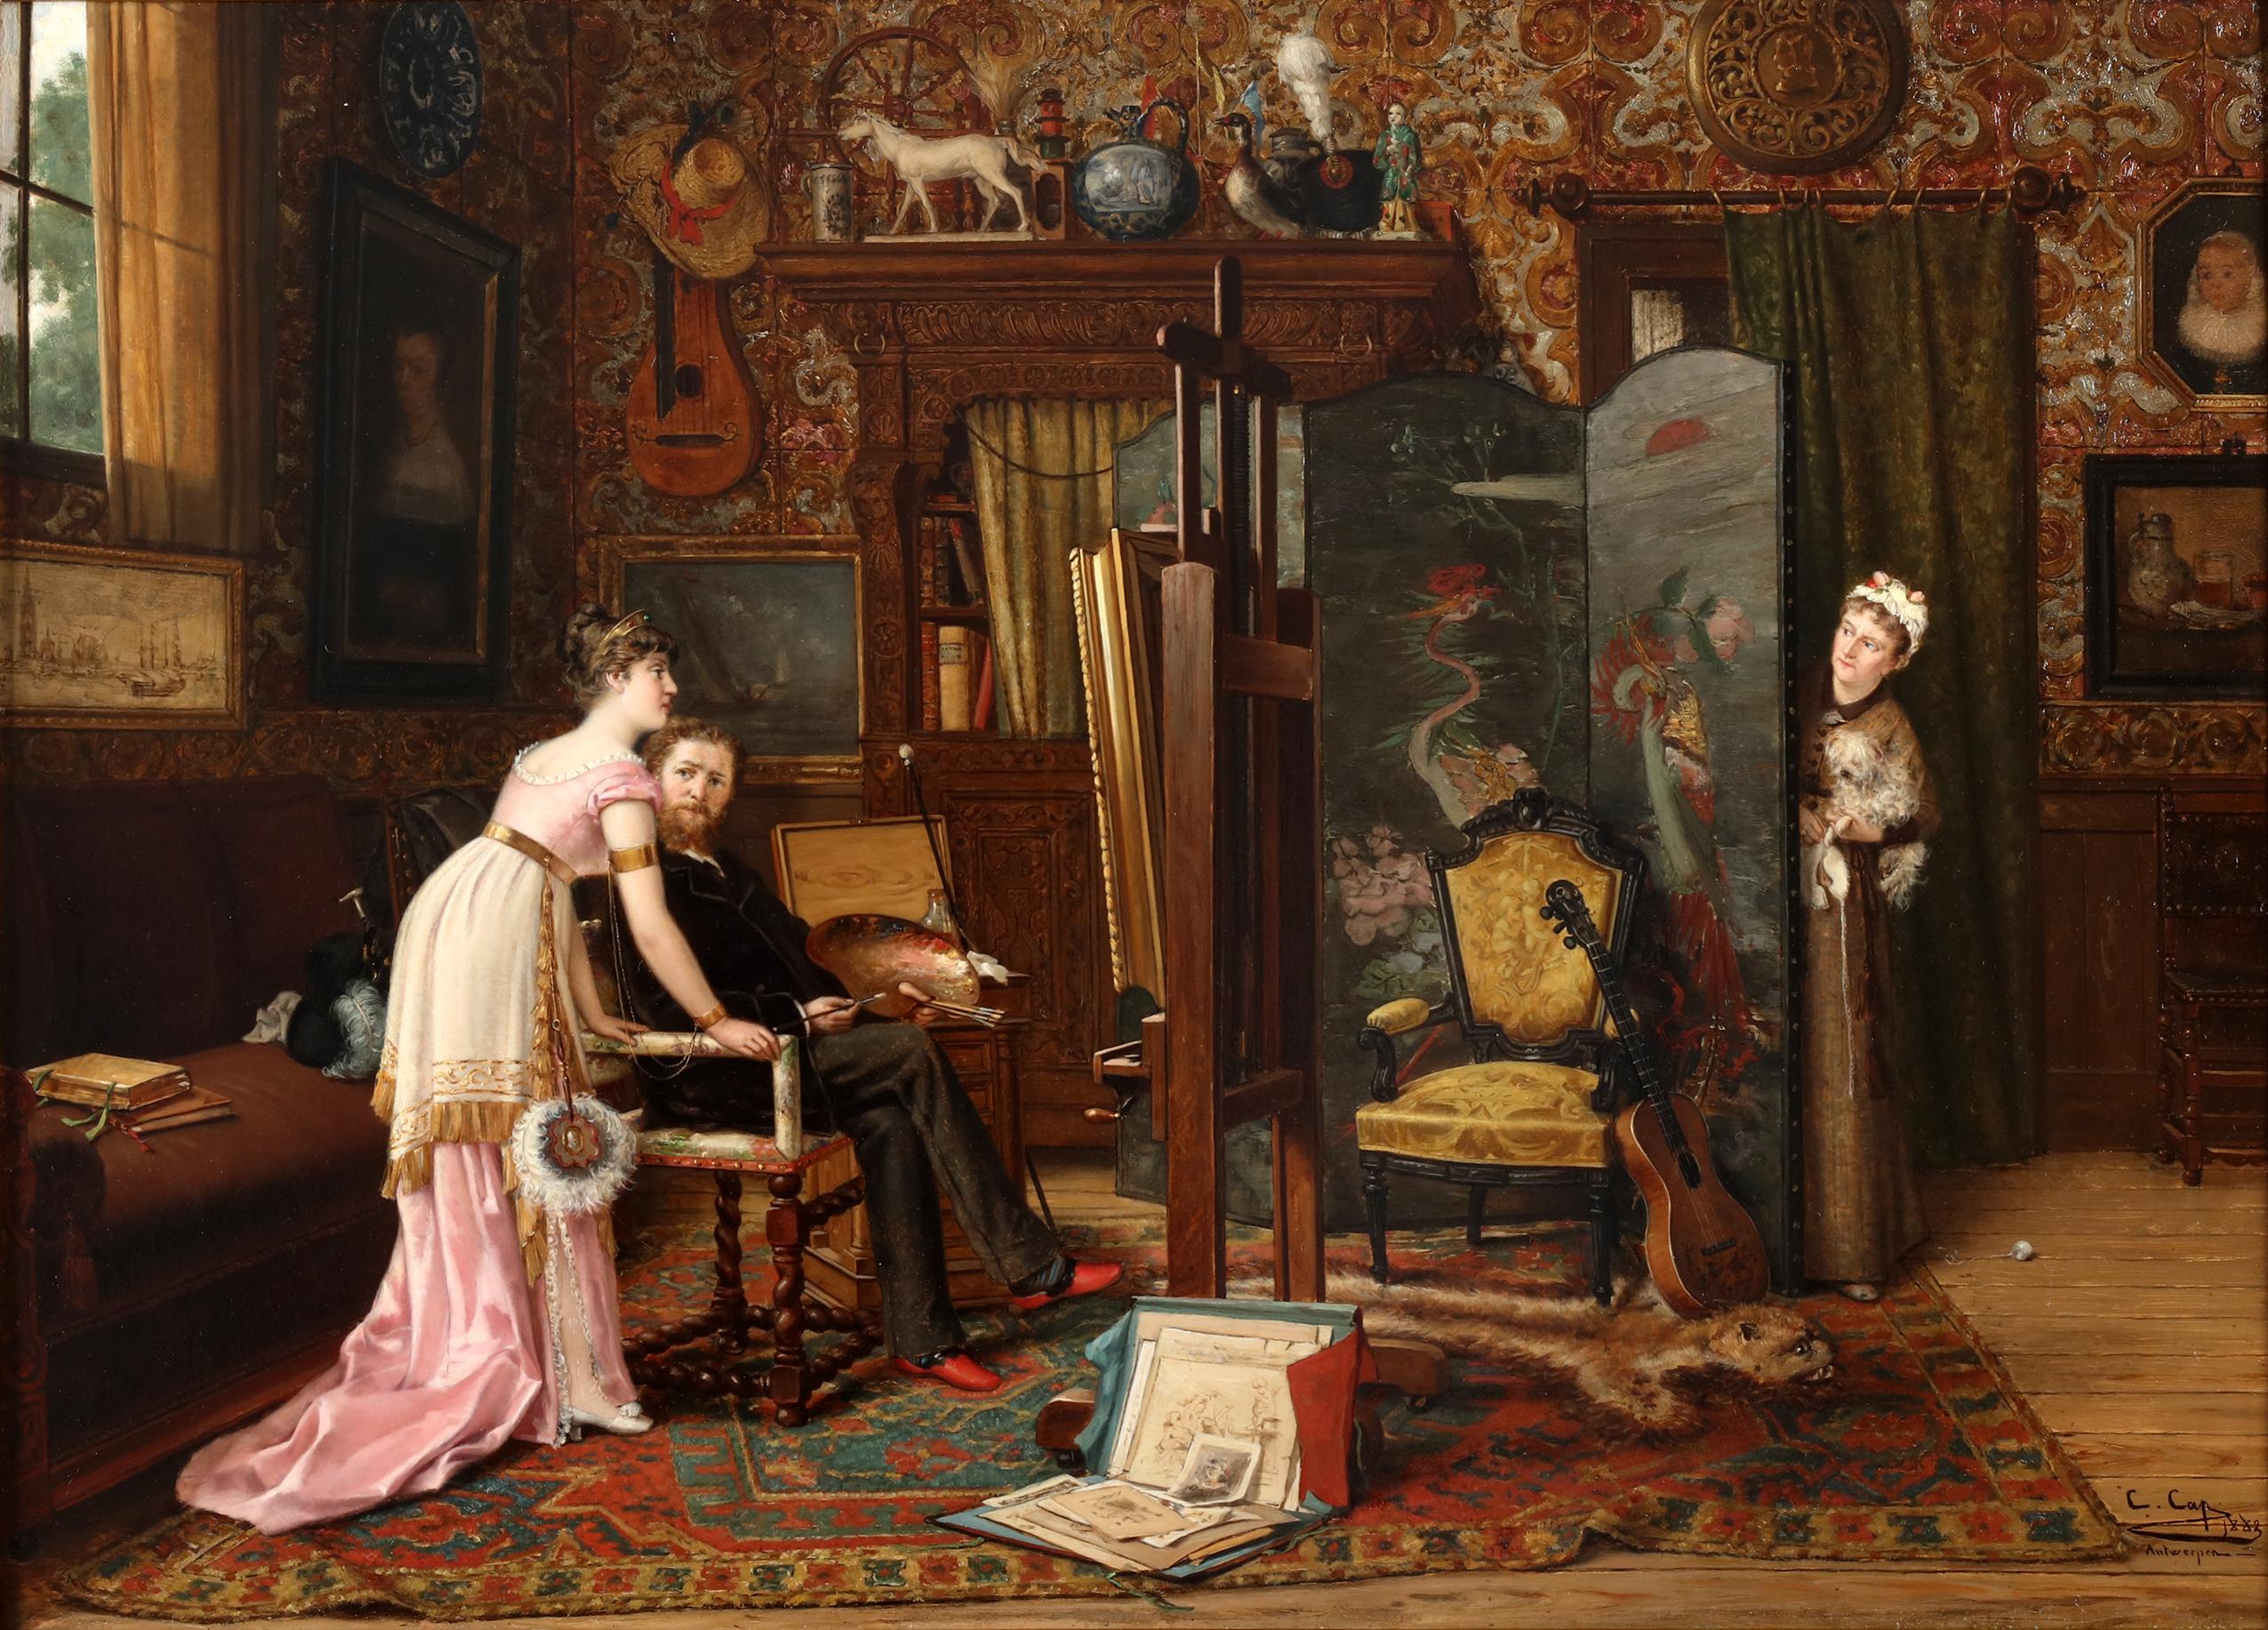 The artist at work by Constant Cap (1842-1915) 2